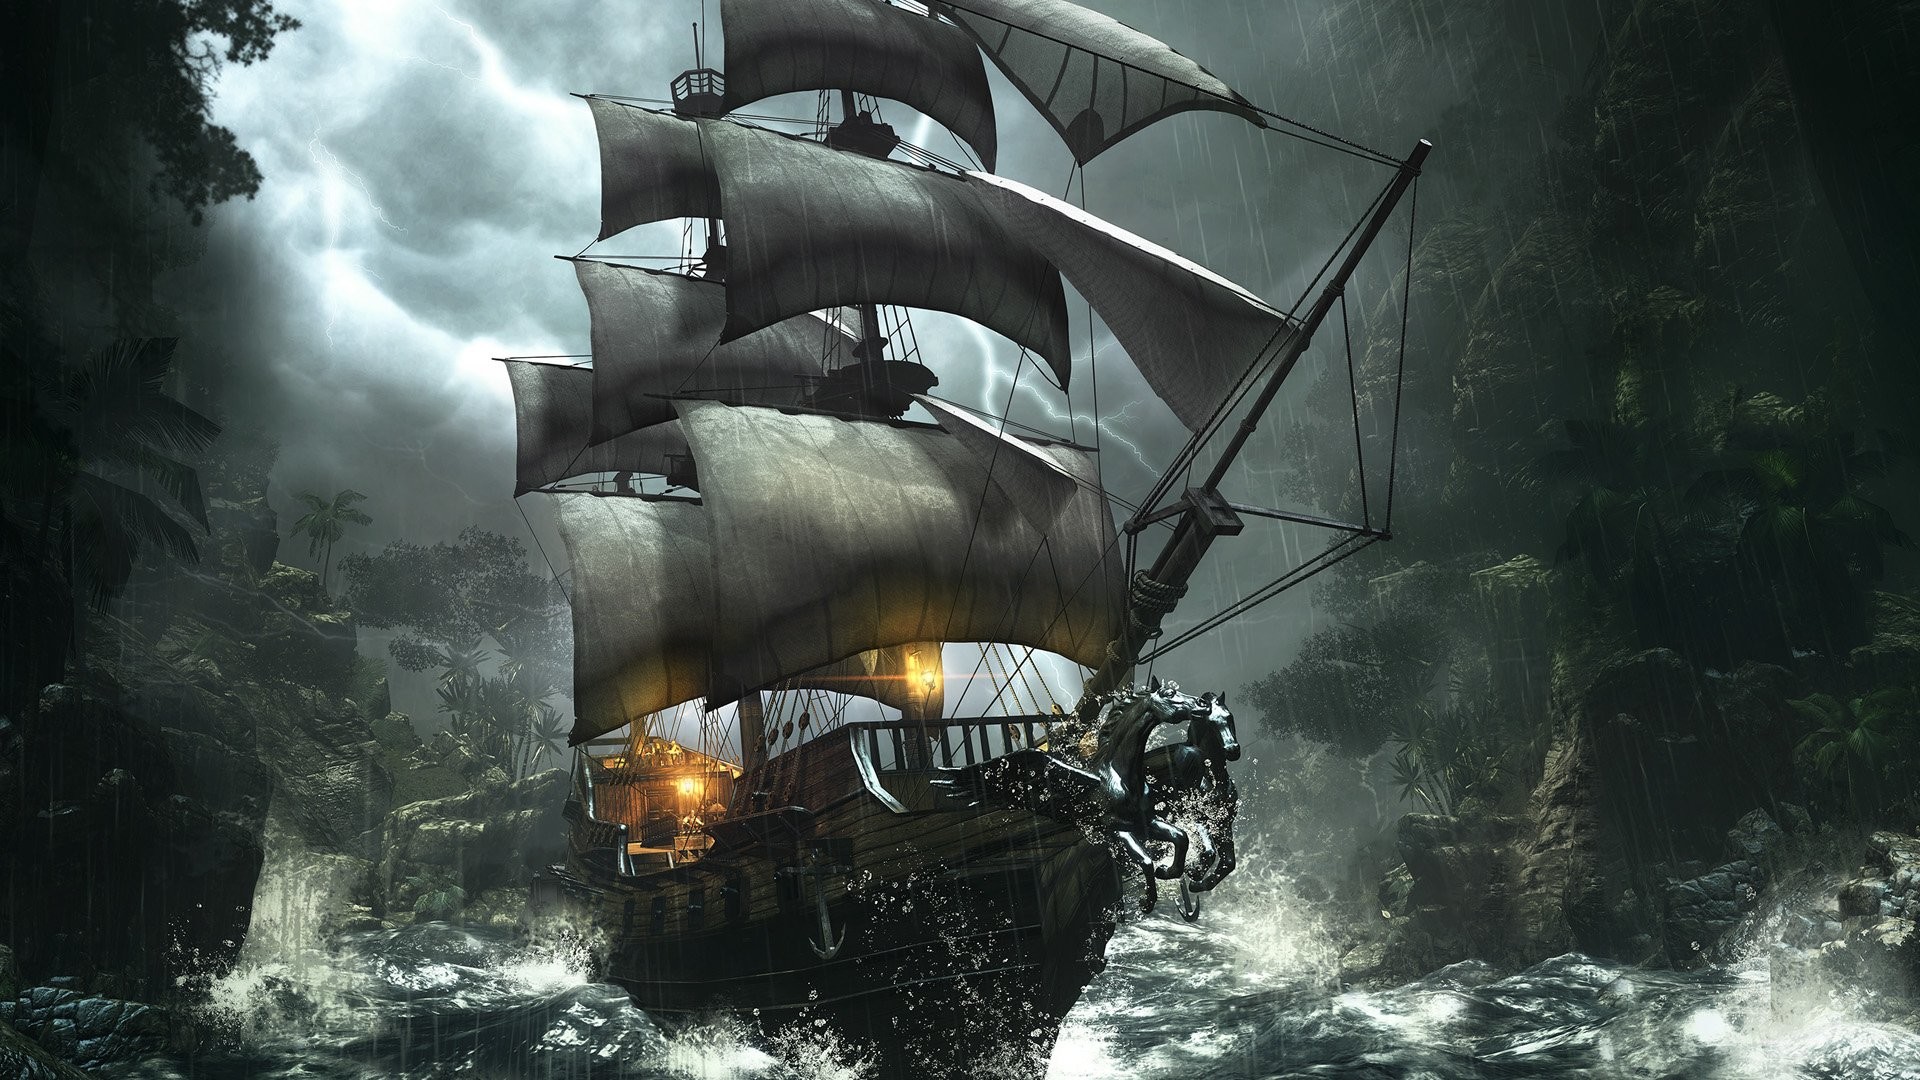 Pirate Ship Wallpaper High Definition #02c20 px 420.15 KB Other  Map. 1280×1024.